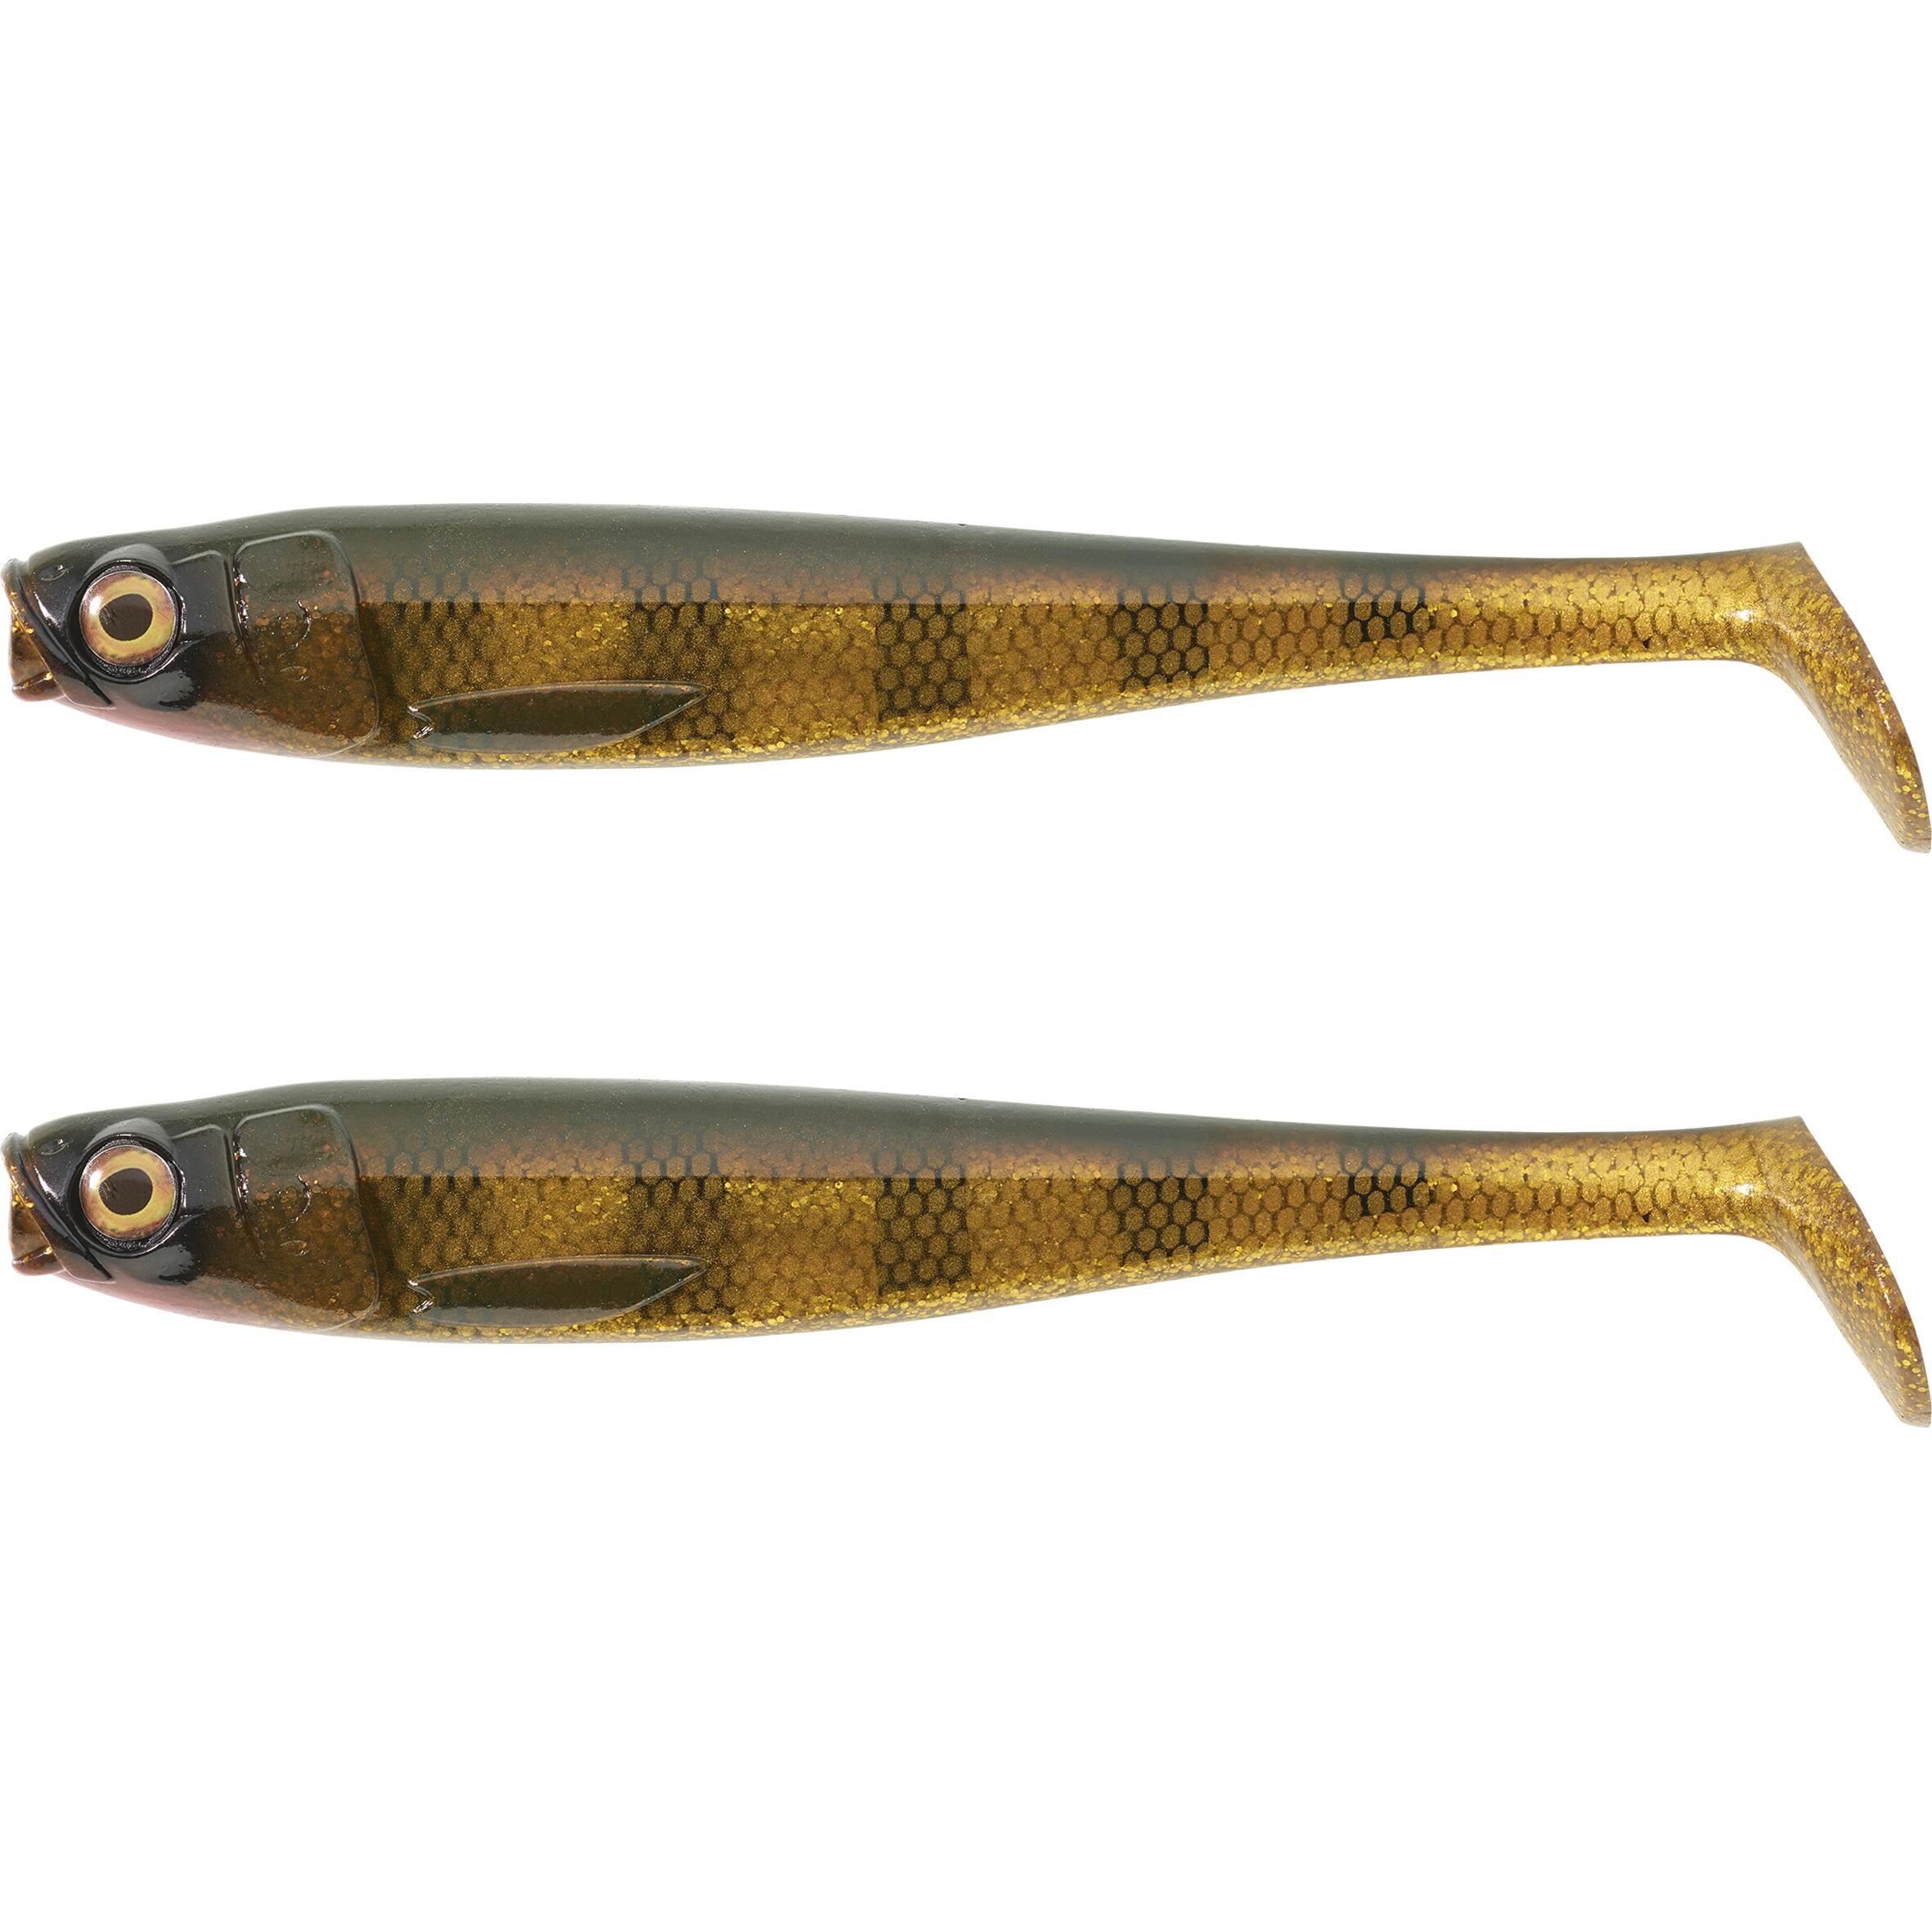 ROGEN SOFT SHAD PIKE LURE 120 GOLD X2 1/4